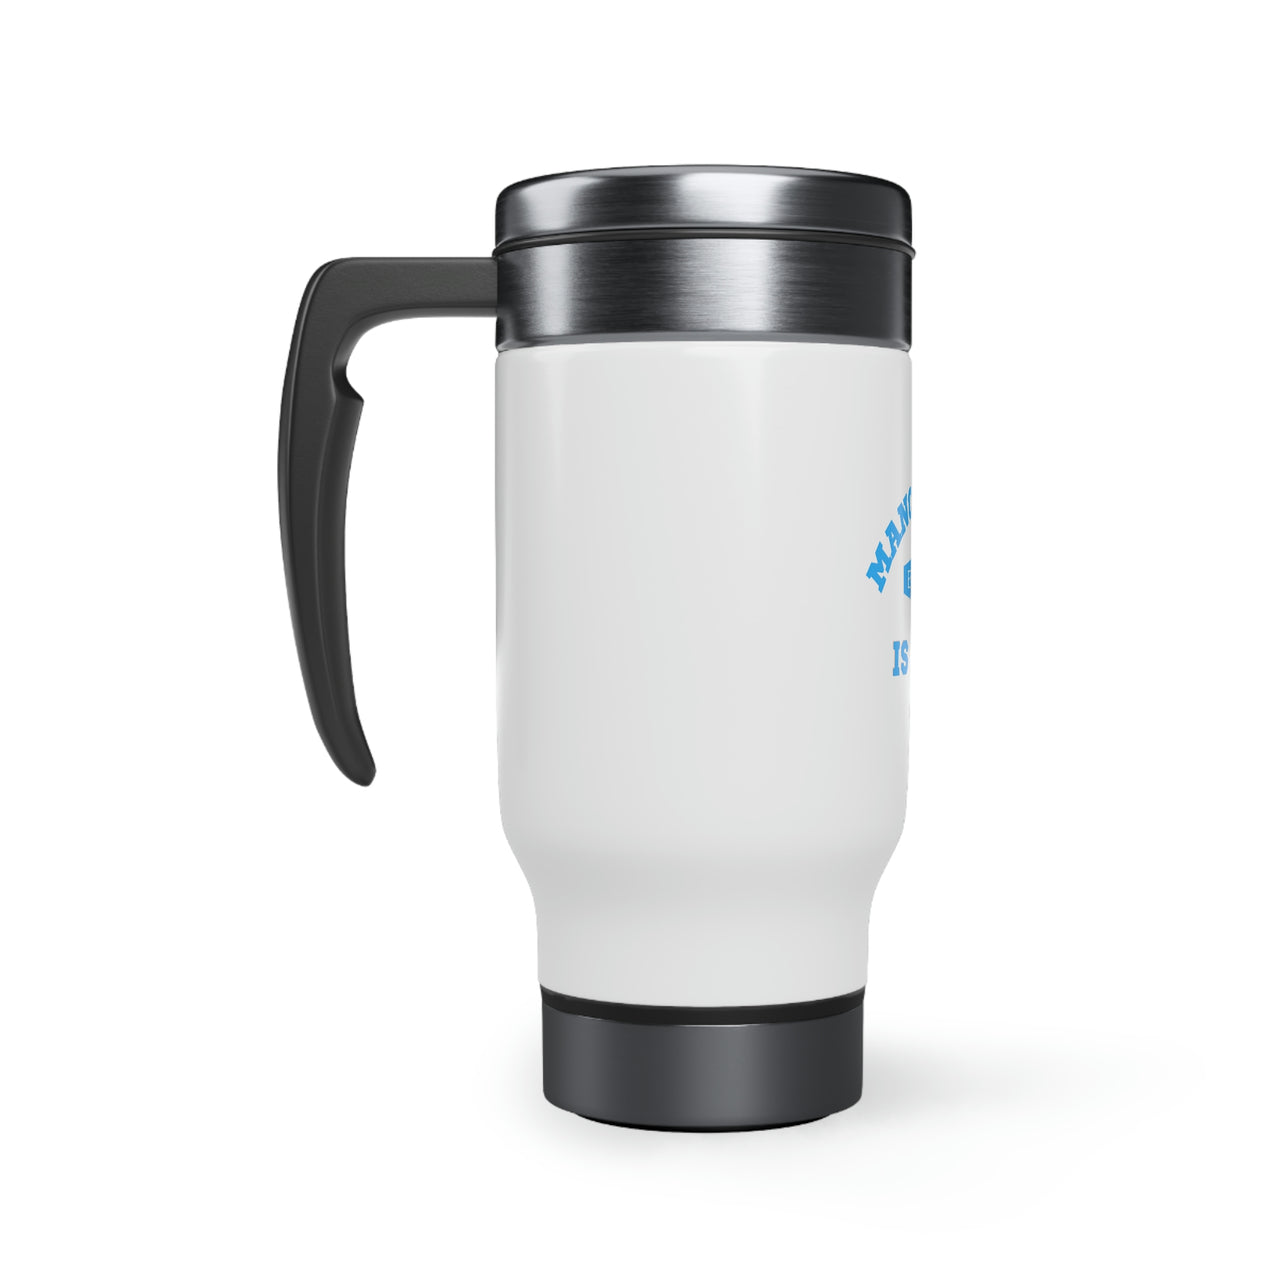 Manchester City Stainless Steel Travel Mug with Handle, 14oz